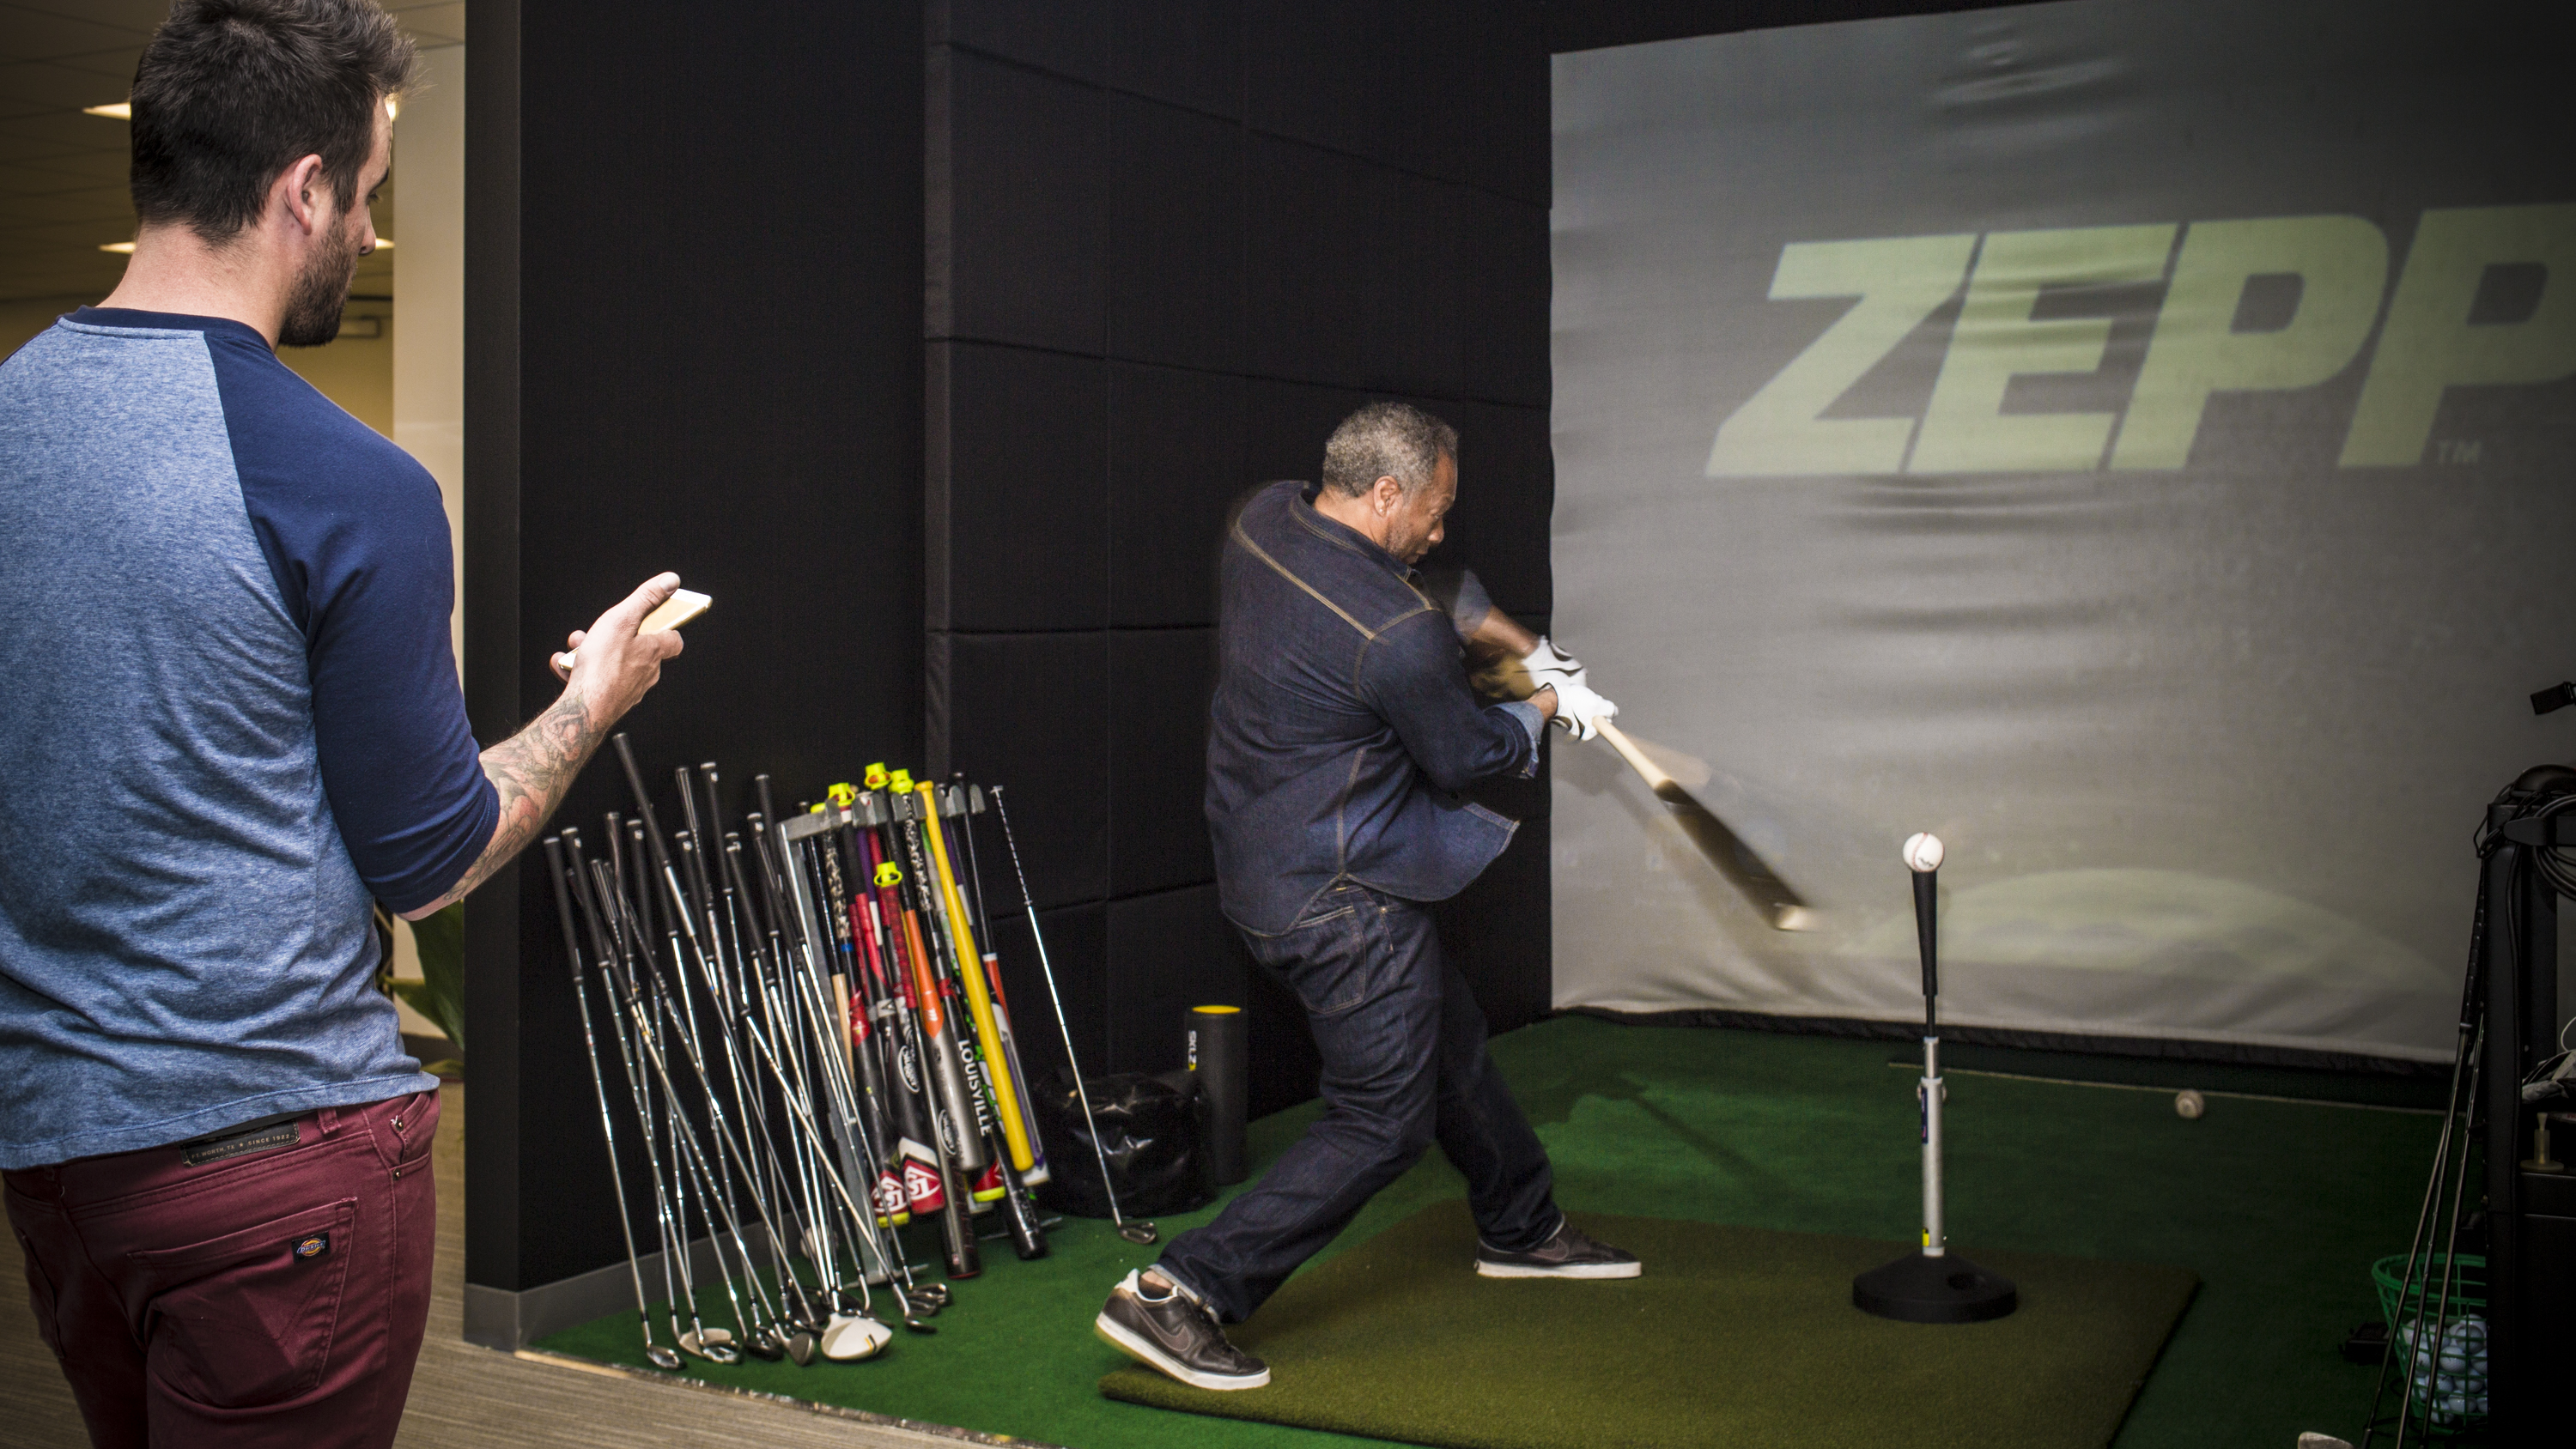 CNET reporter Terry Collins takes his cuts using sport-tech company Zepp's Smart Bat, which will hit the market this summer. The bat has a sensor inside its handle to track speed and impact.